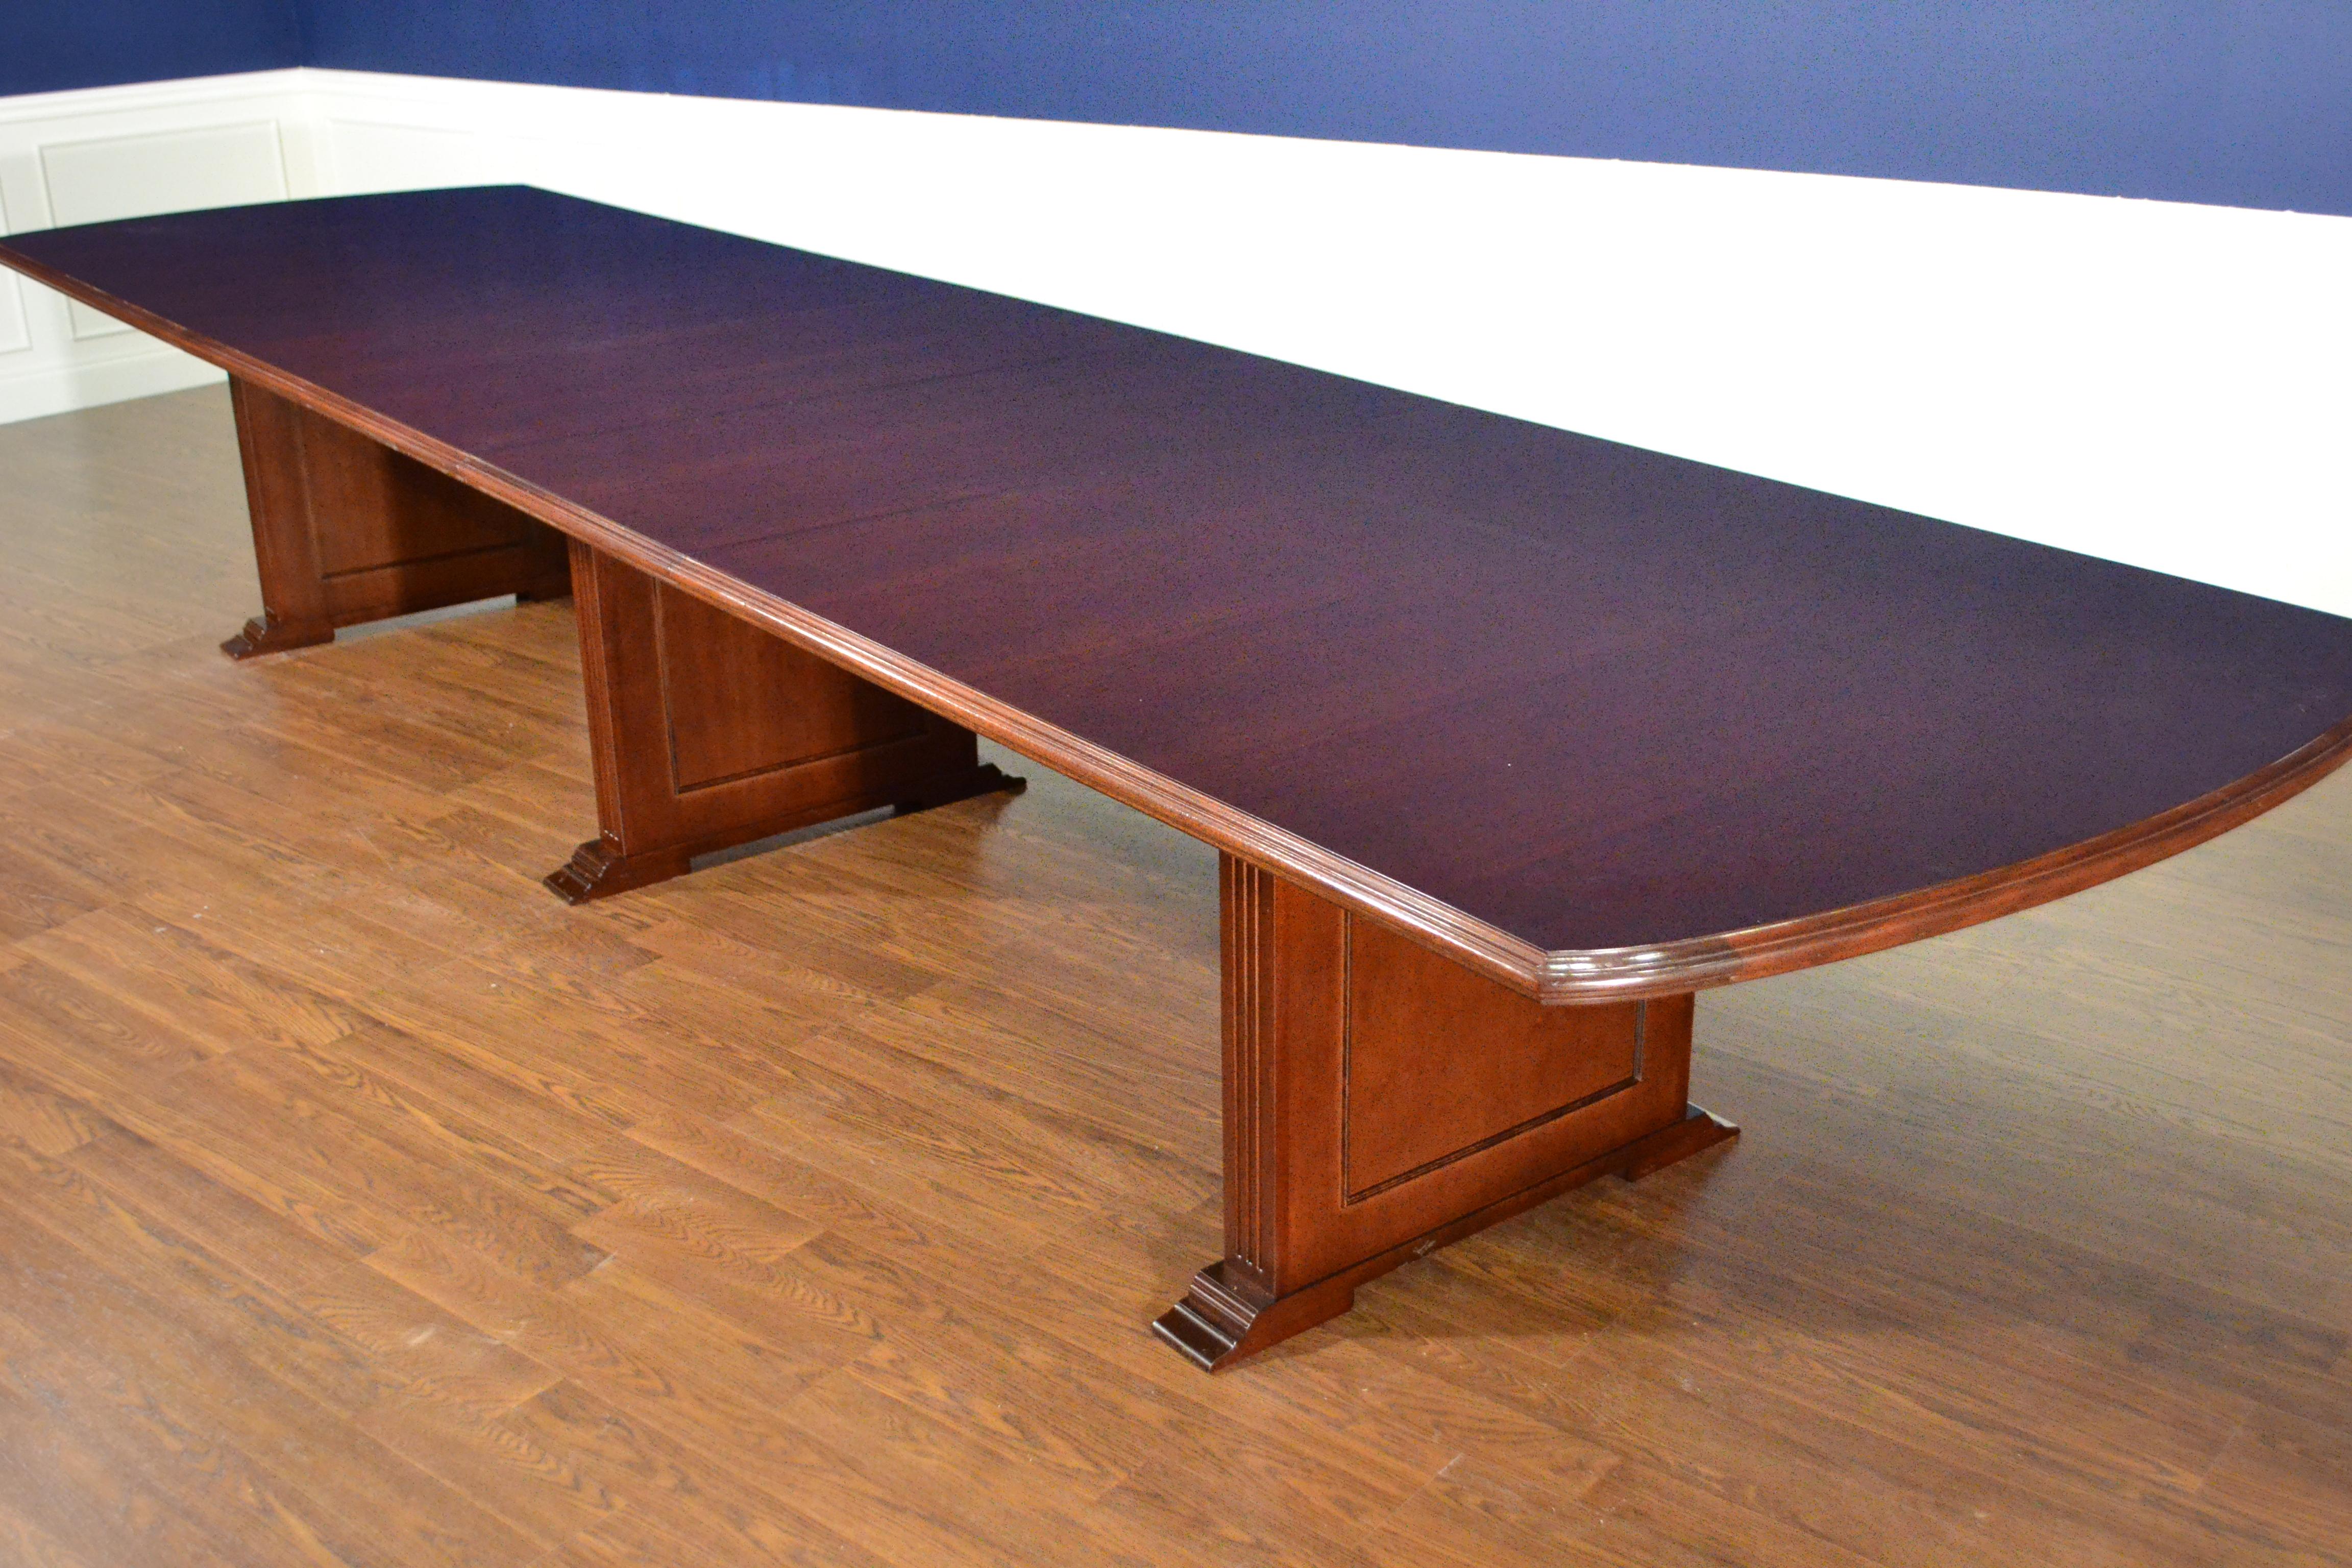 This is a made-to-order mahogany conference table made in the Leighton Hall shop. It features a field of cathedral mahogany with an Ogee-shaped solid mahogany edge. It has three 